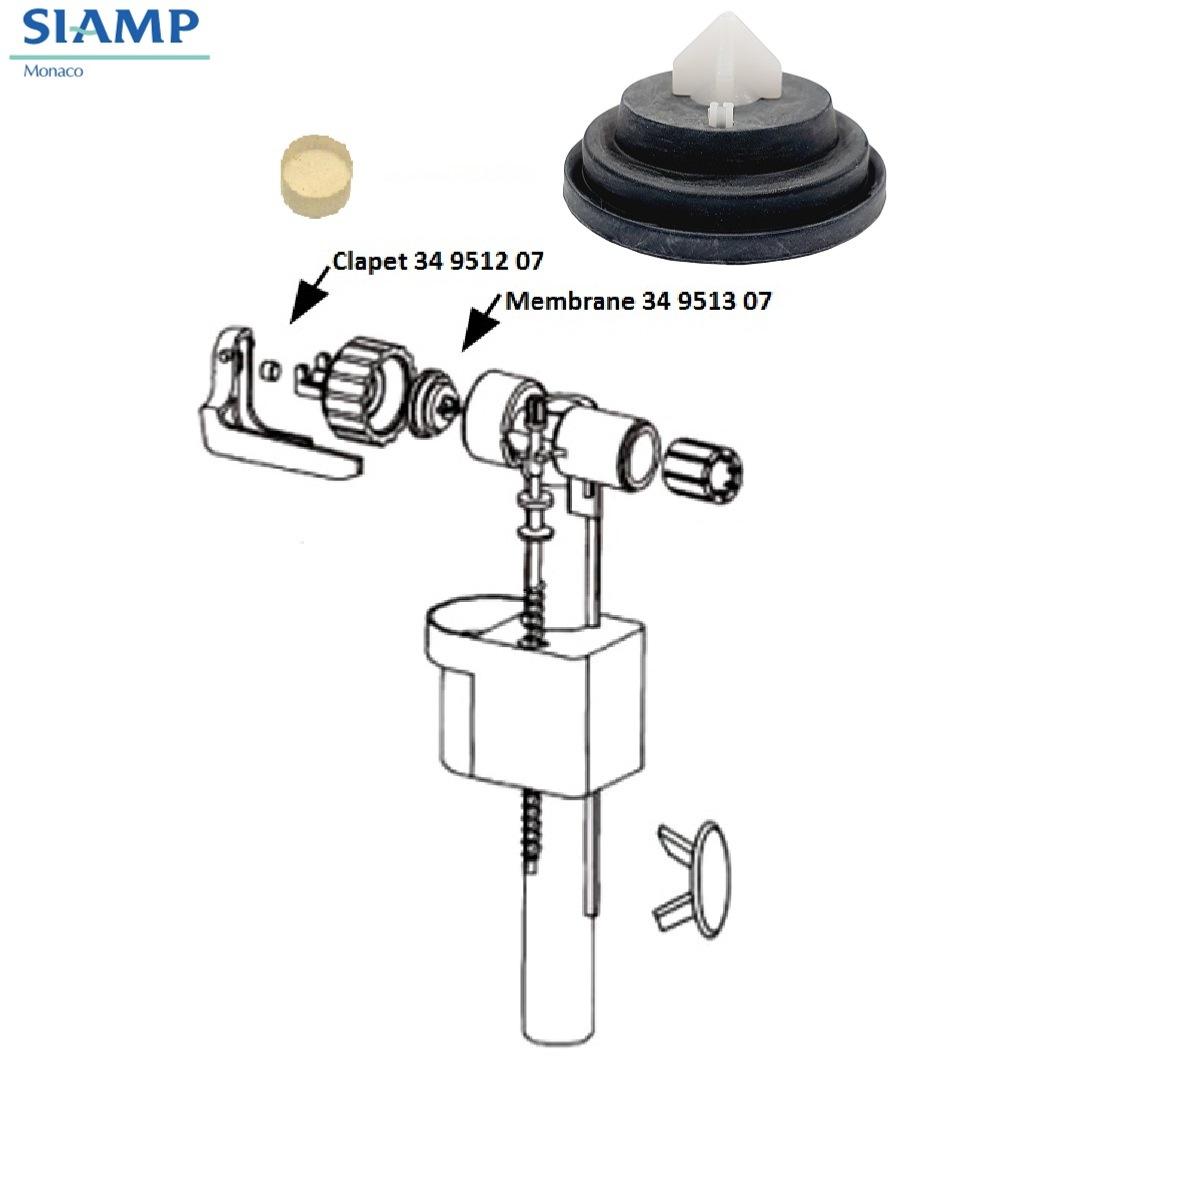 Siamp 34 9513 20 Membrane and Insert, 95 and 99 